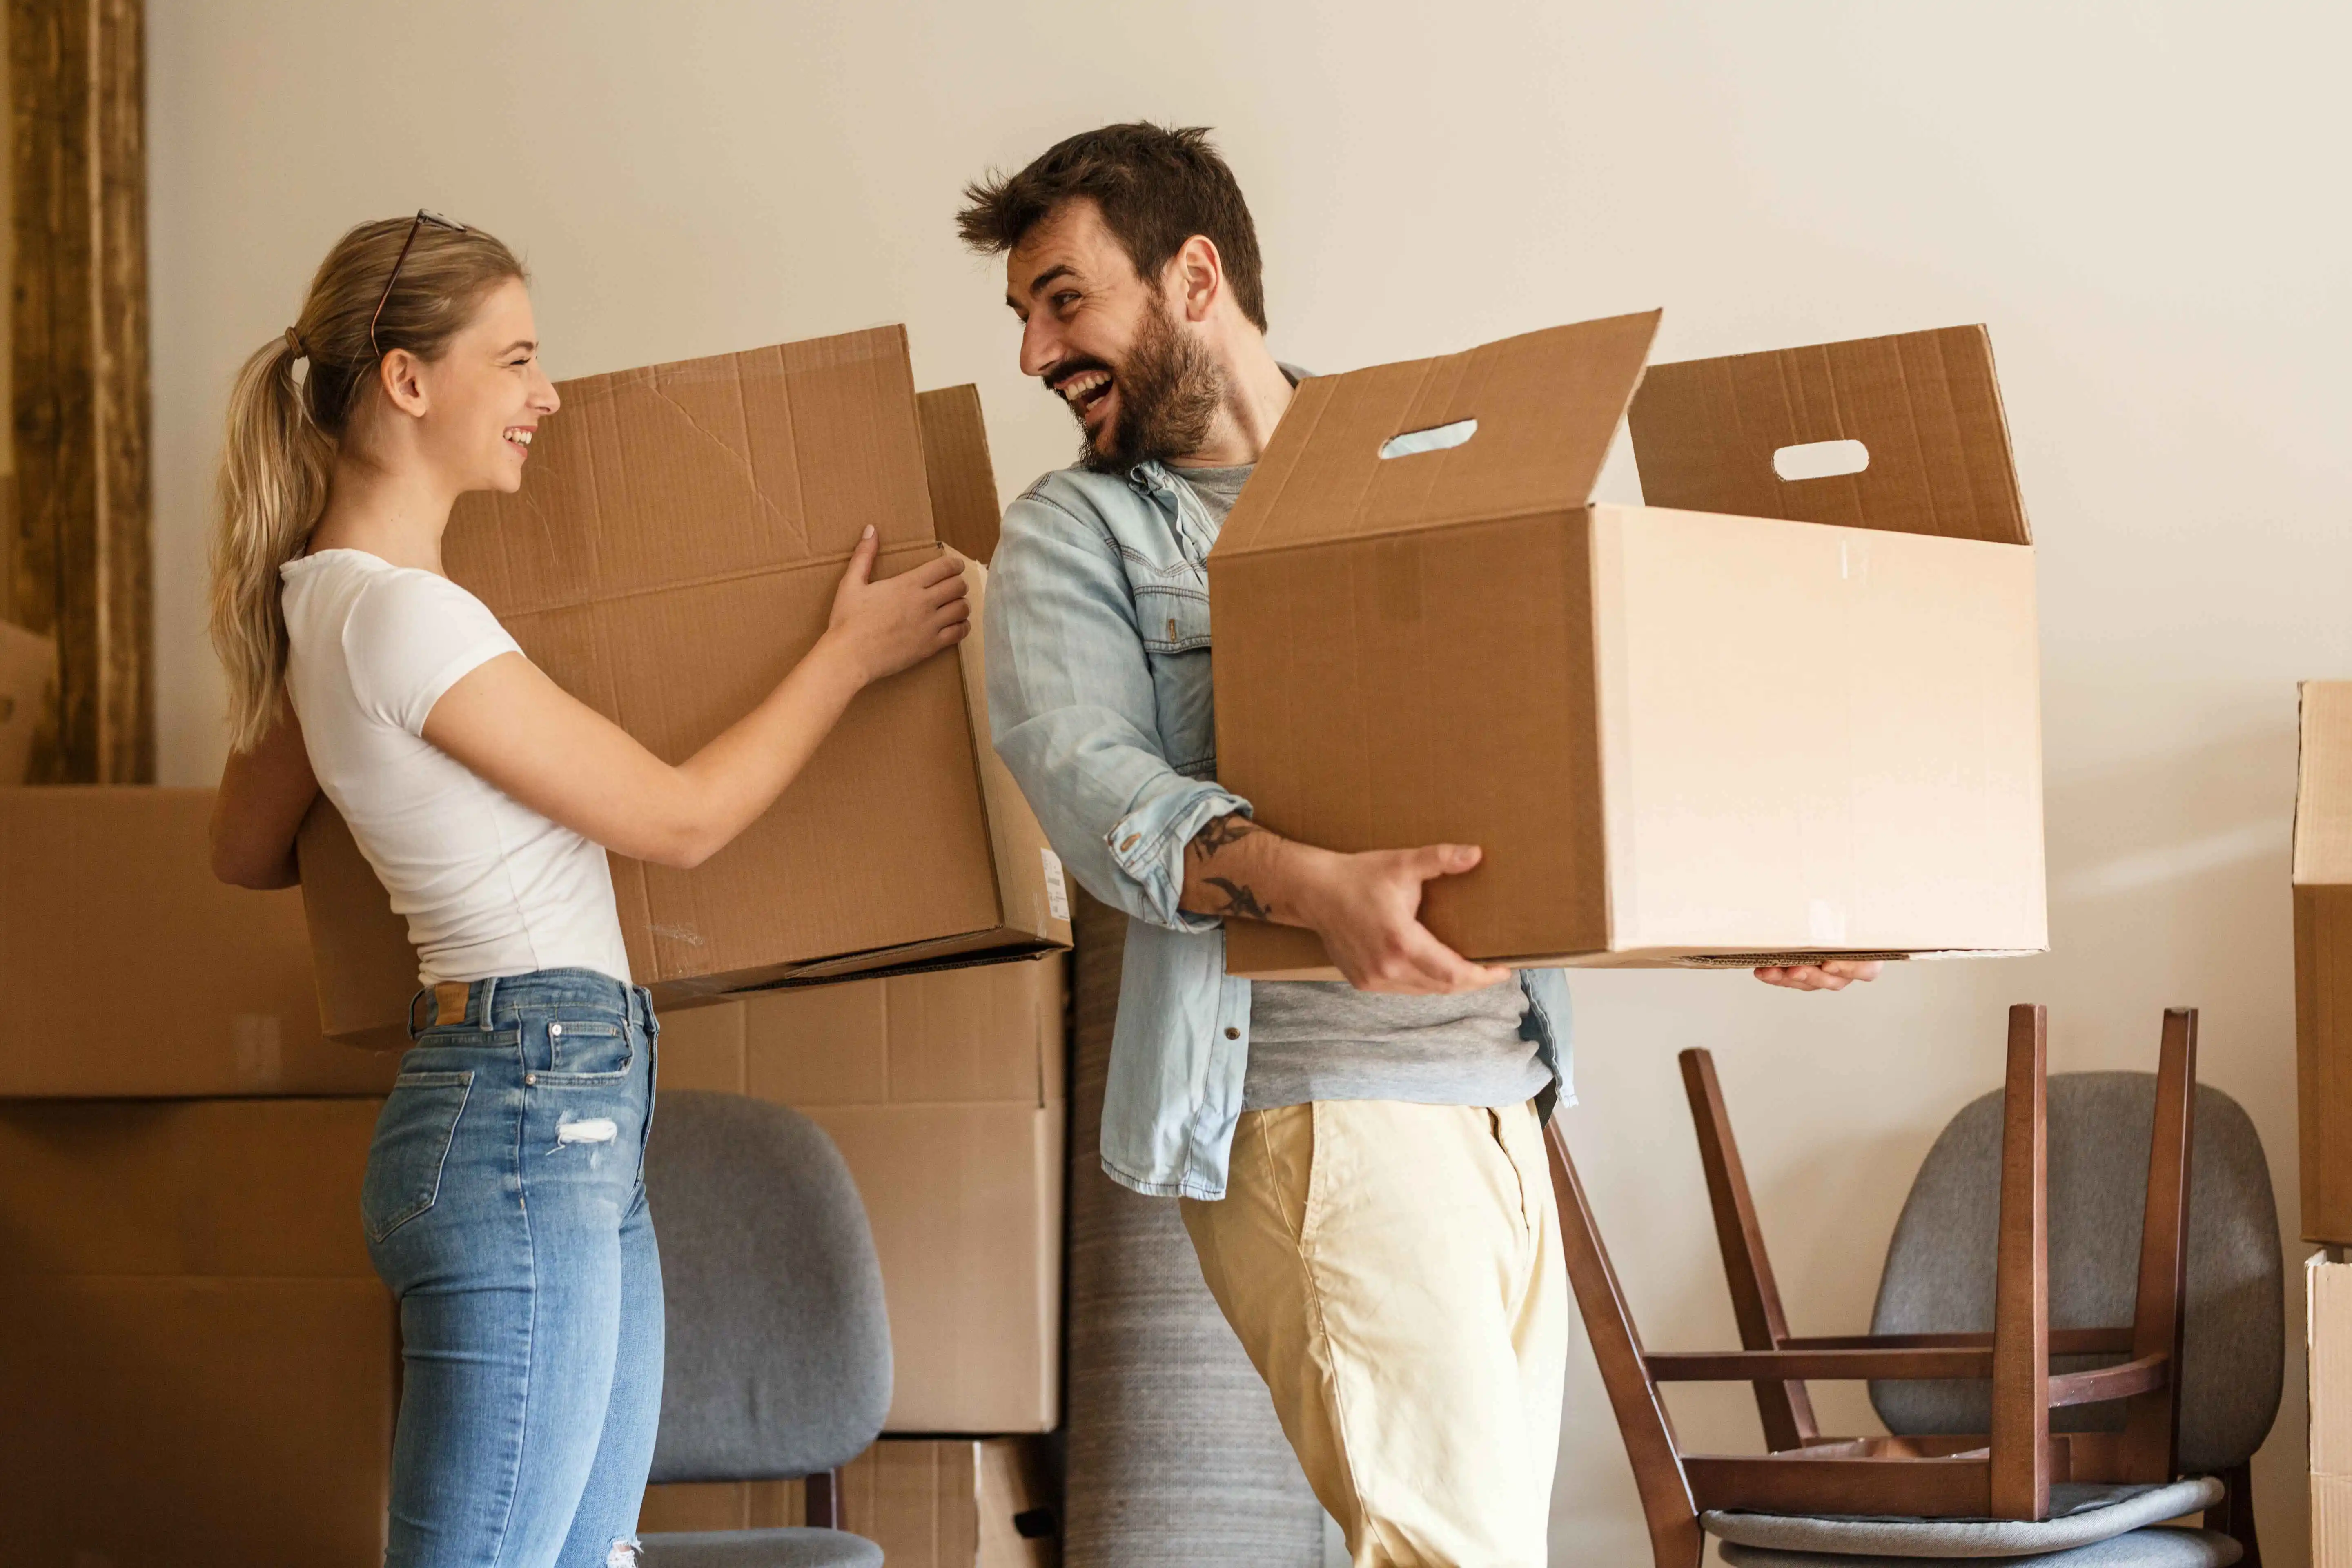  Renting or Buying? When the choice overwhelms